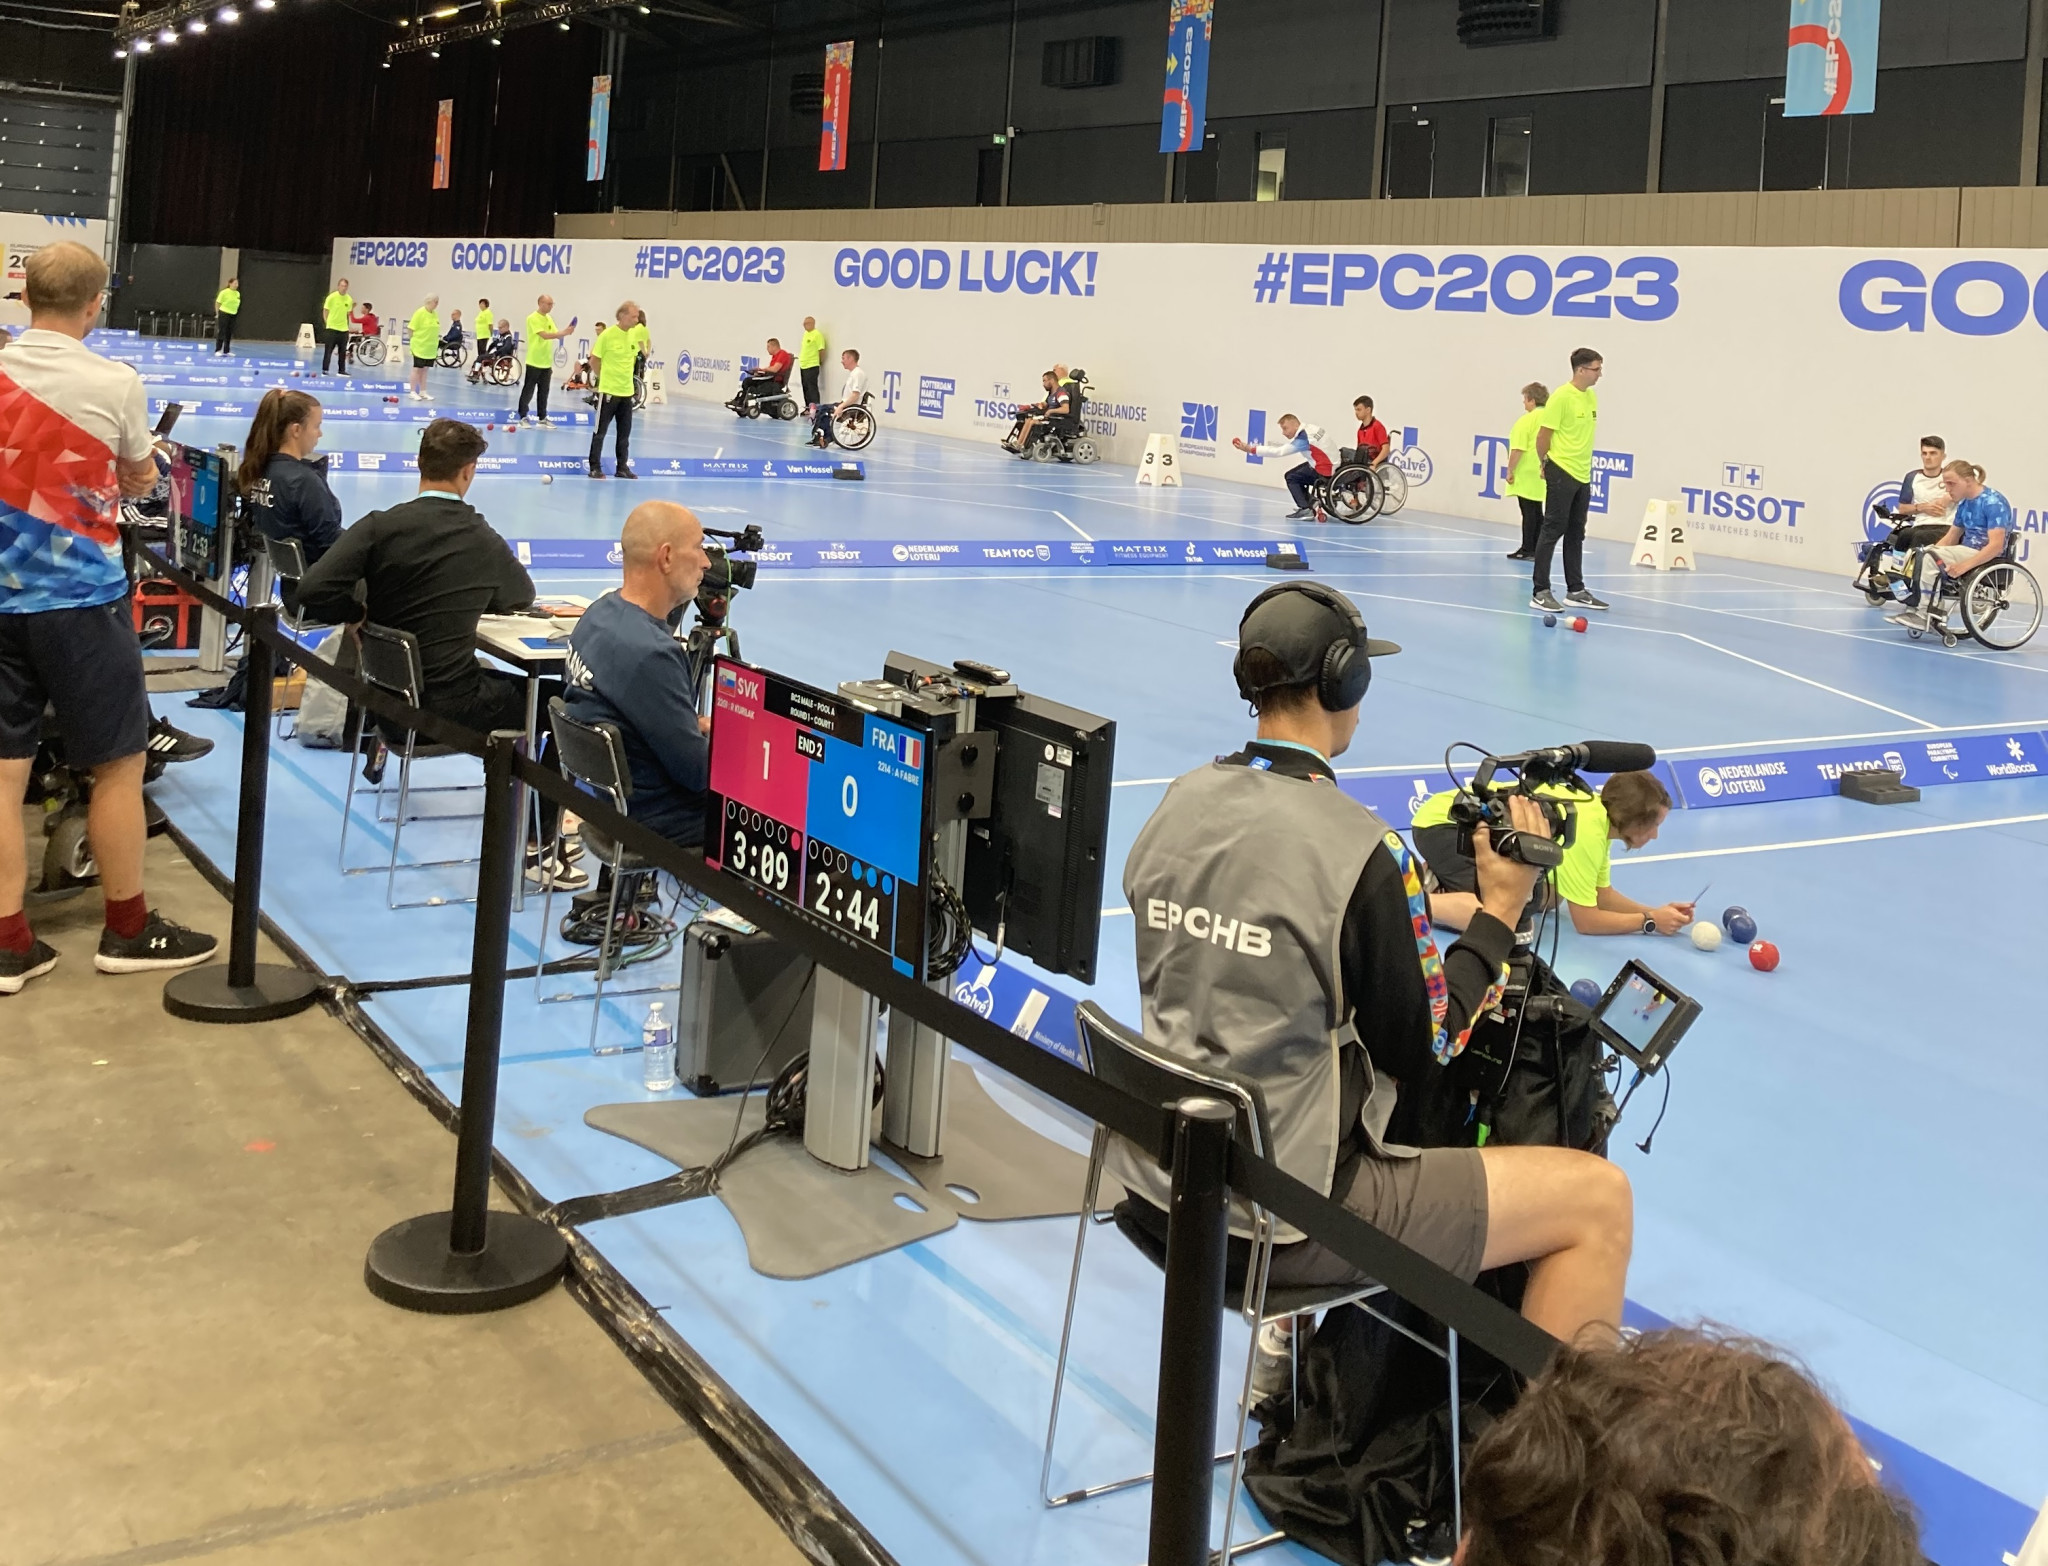 Boccia is one of 10 sports on the programme in Rotterdam and three more could join in 2027 ©ITG